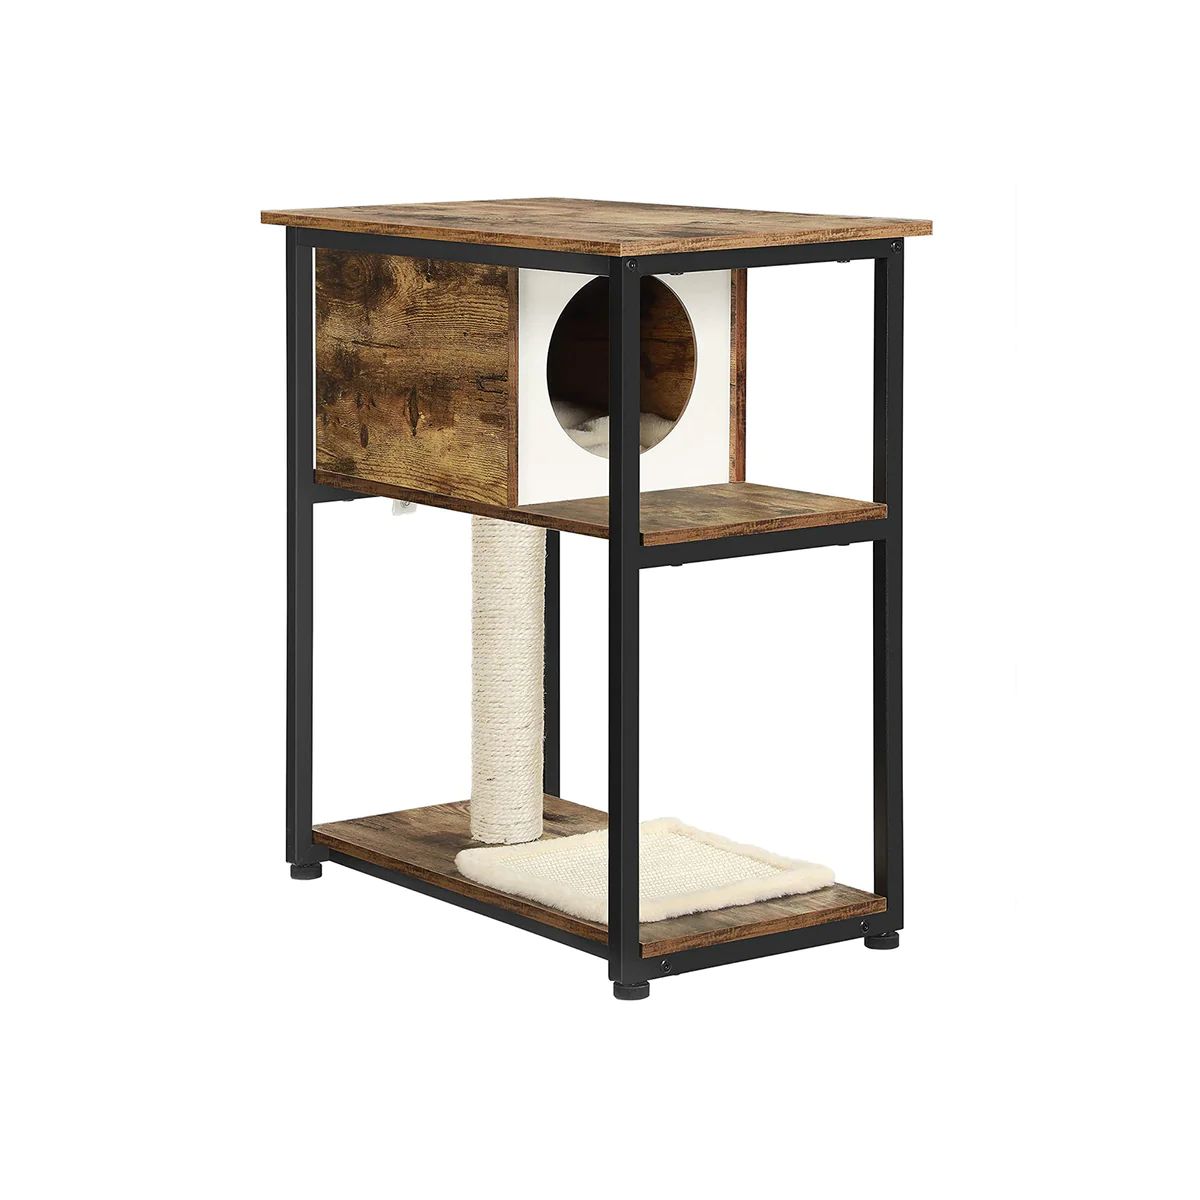 Feandrea Cat Tree and End Table Rustic Brown | SONGMICS